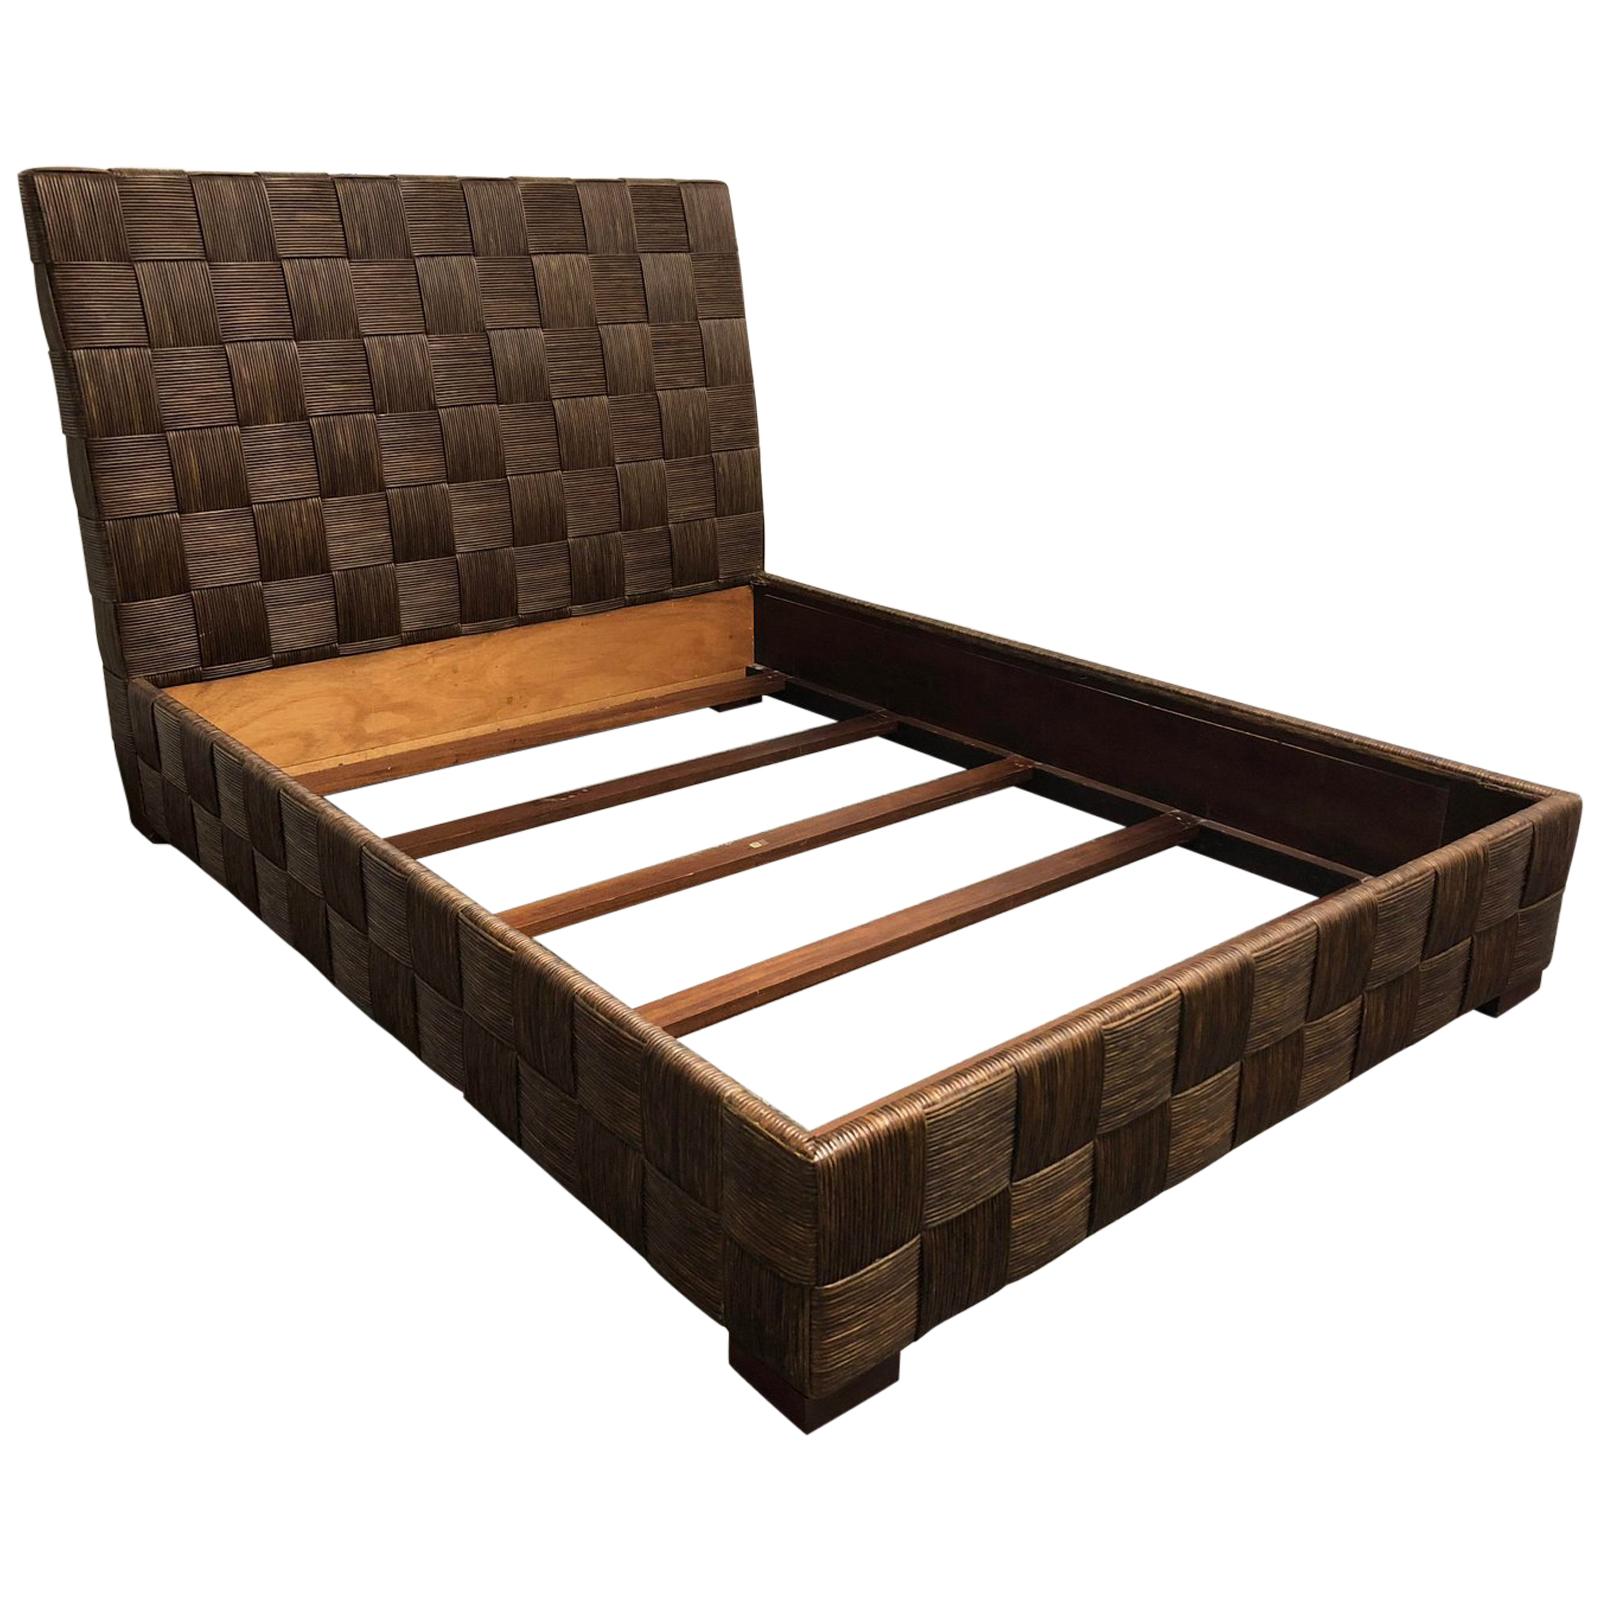 John Hutton for Donghia Block Island Tobacco Queen-Size Bed Frame For Sale